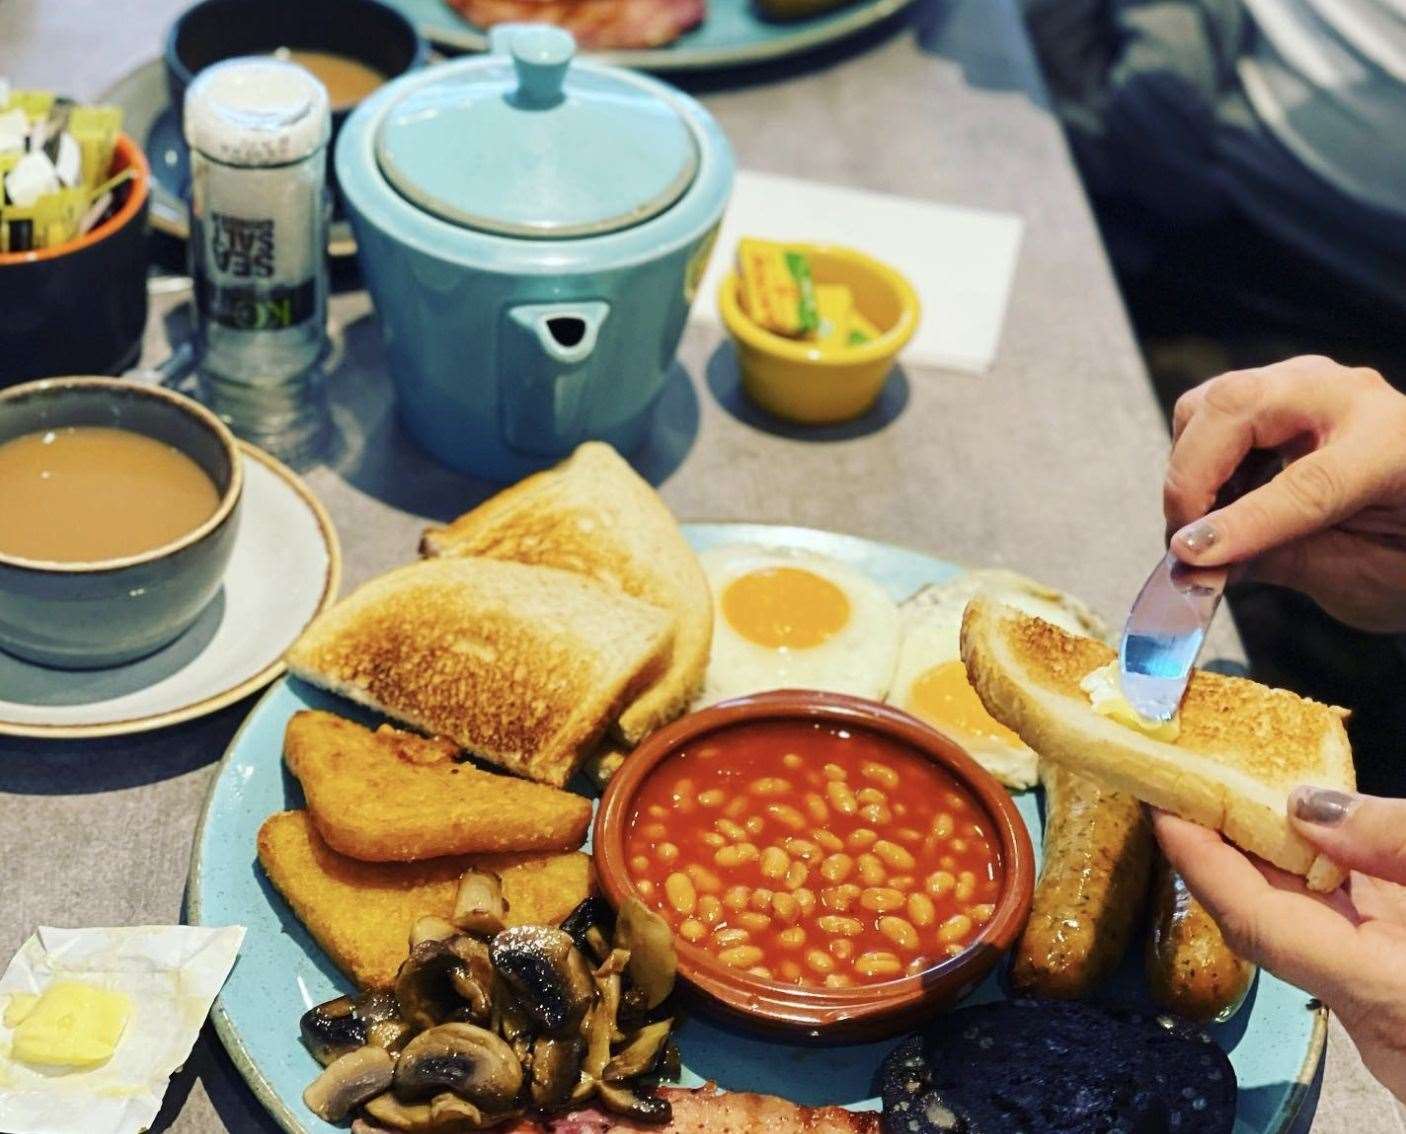 As well as cracking full English breakfasts, the Quills in Rochester also has good vegan options. Picture: The Quills